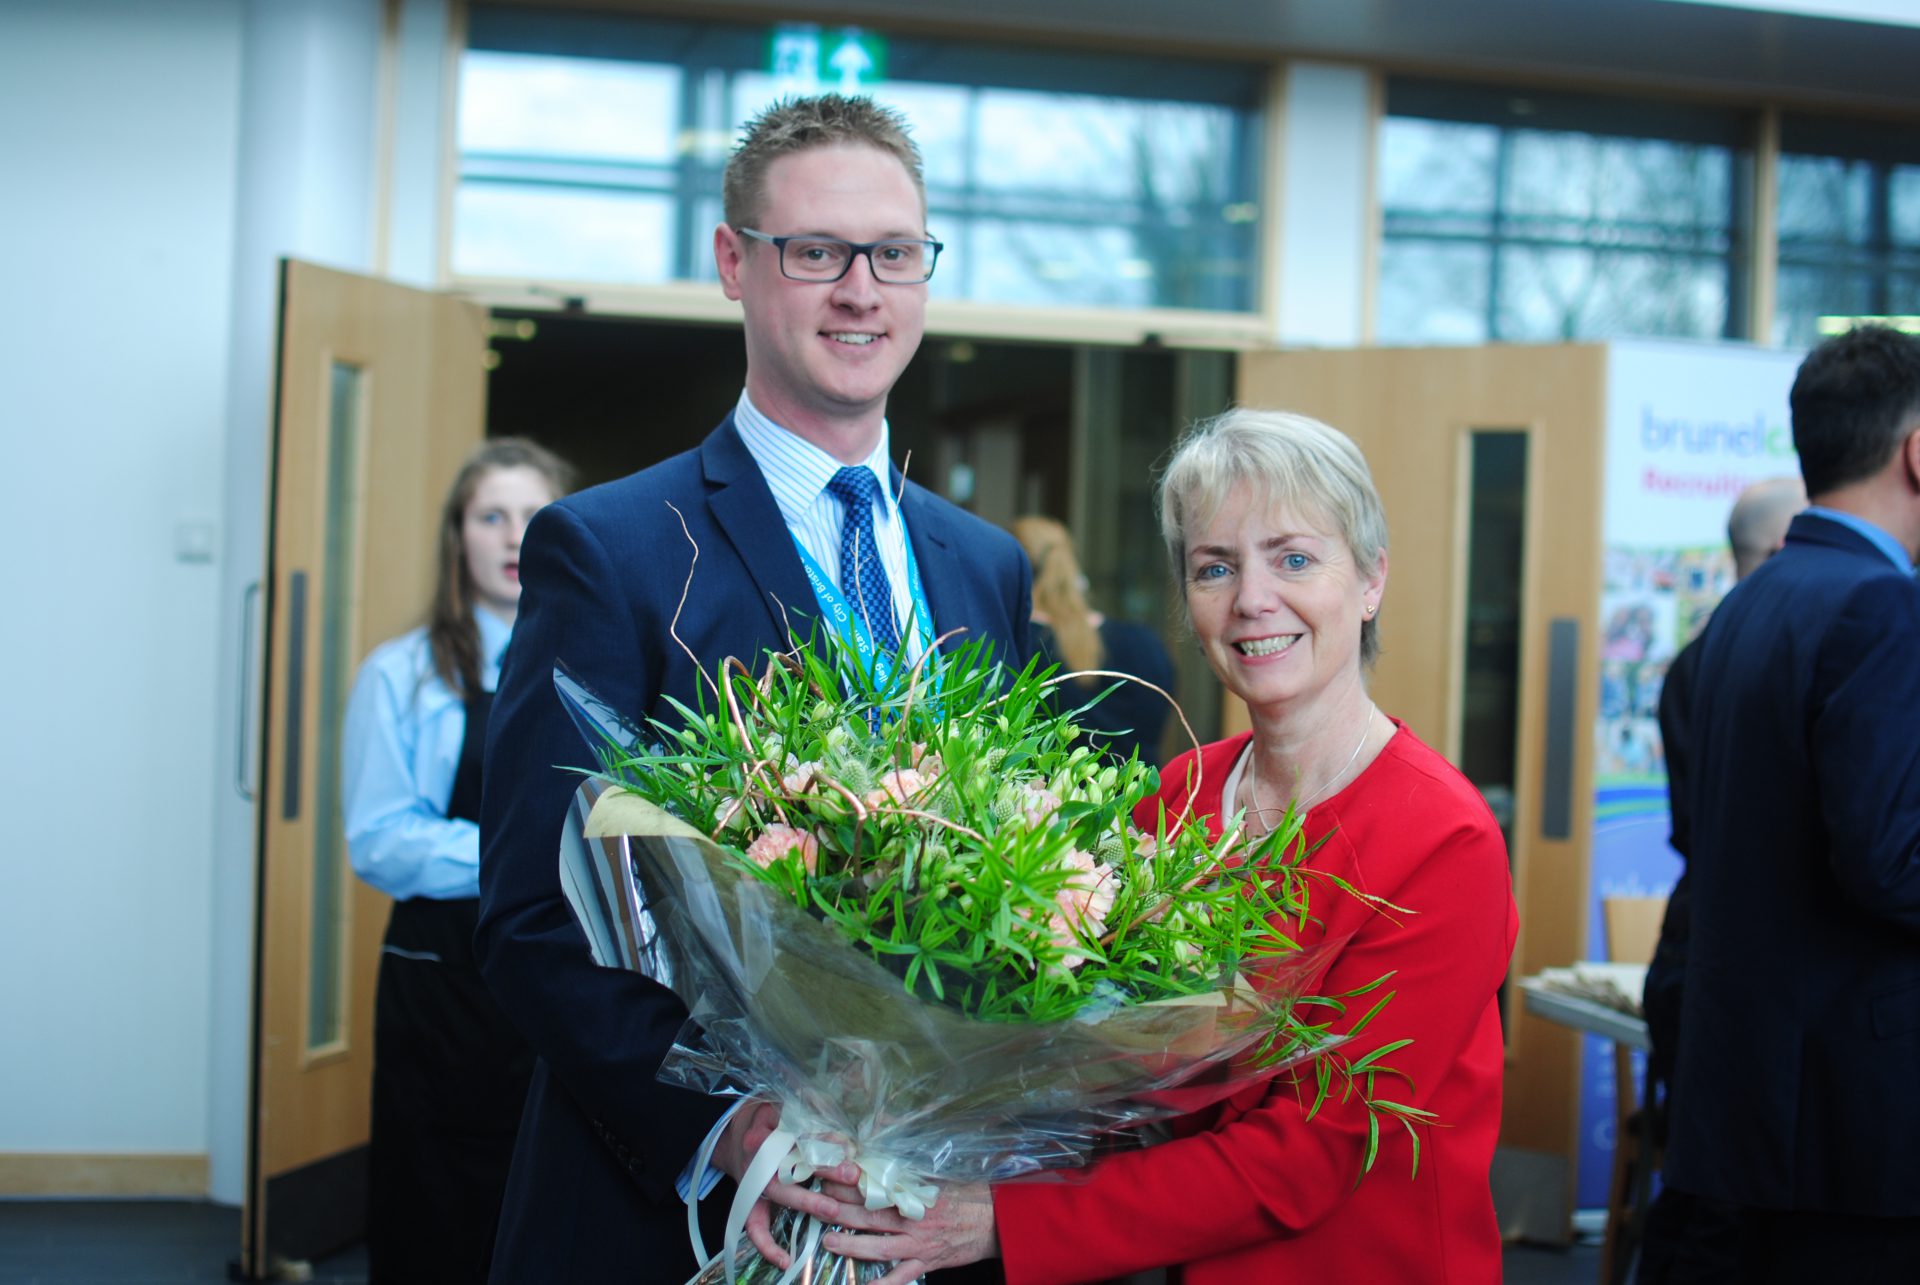 Bristol MP, Karin Smyth holding a bouquet of flowers with Lee Probert, Principal and Chief Executive